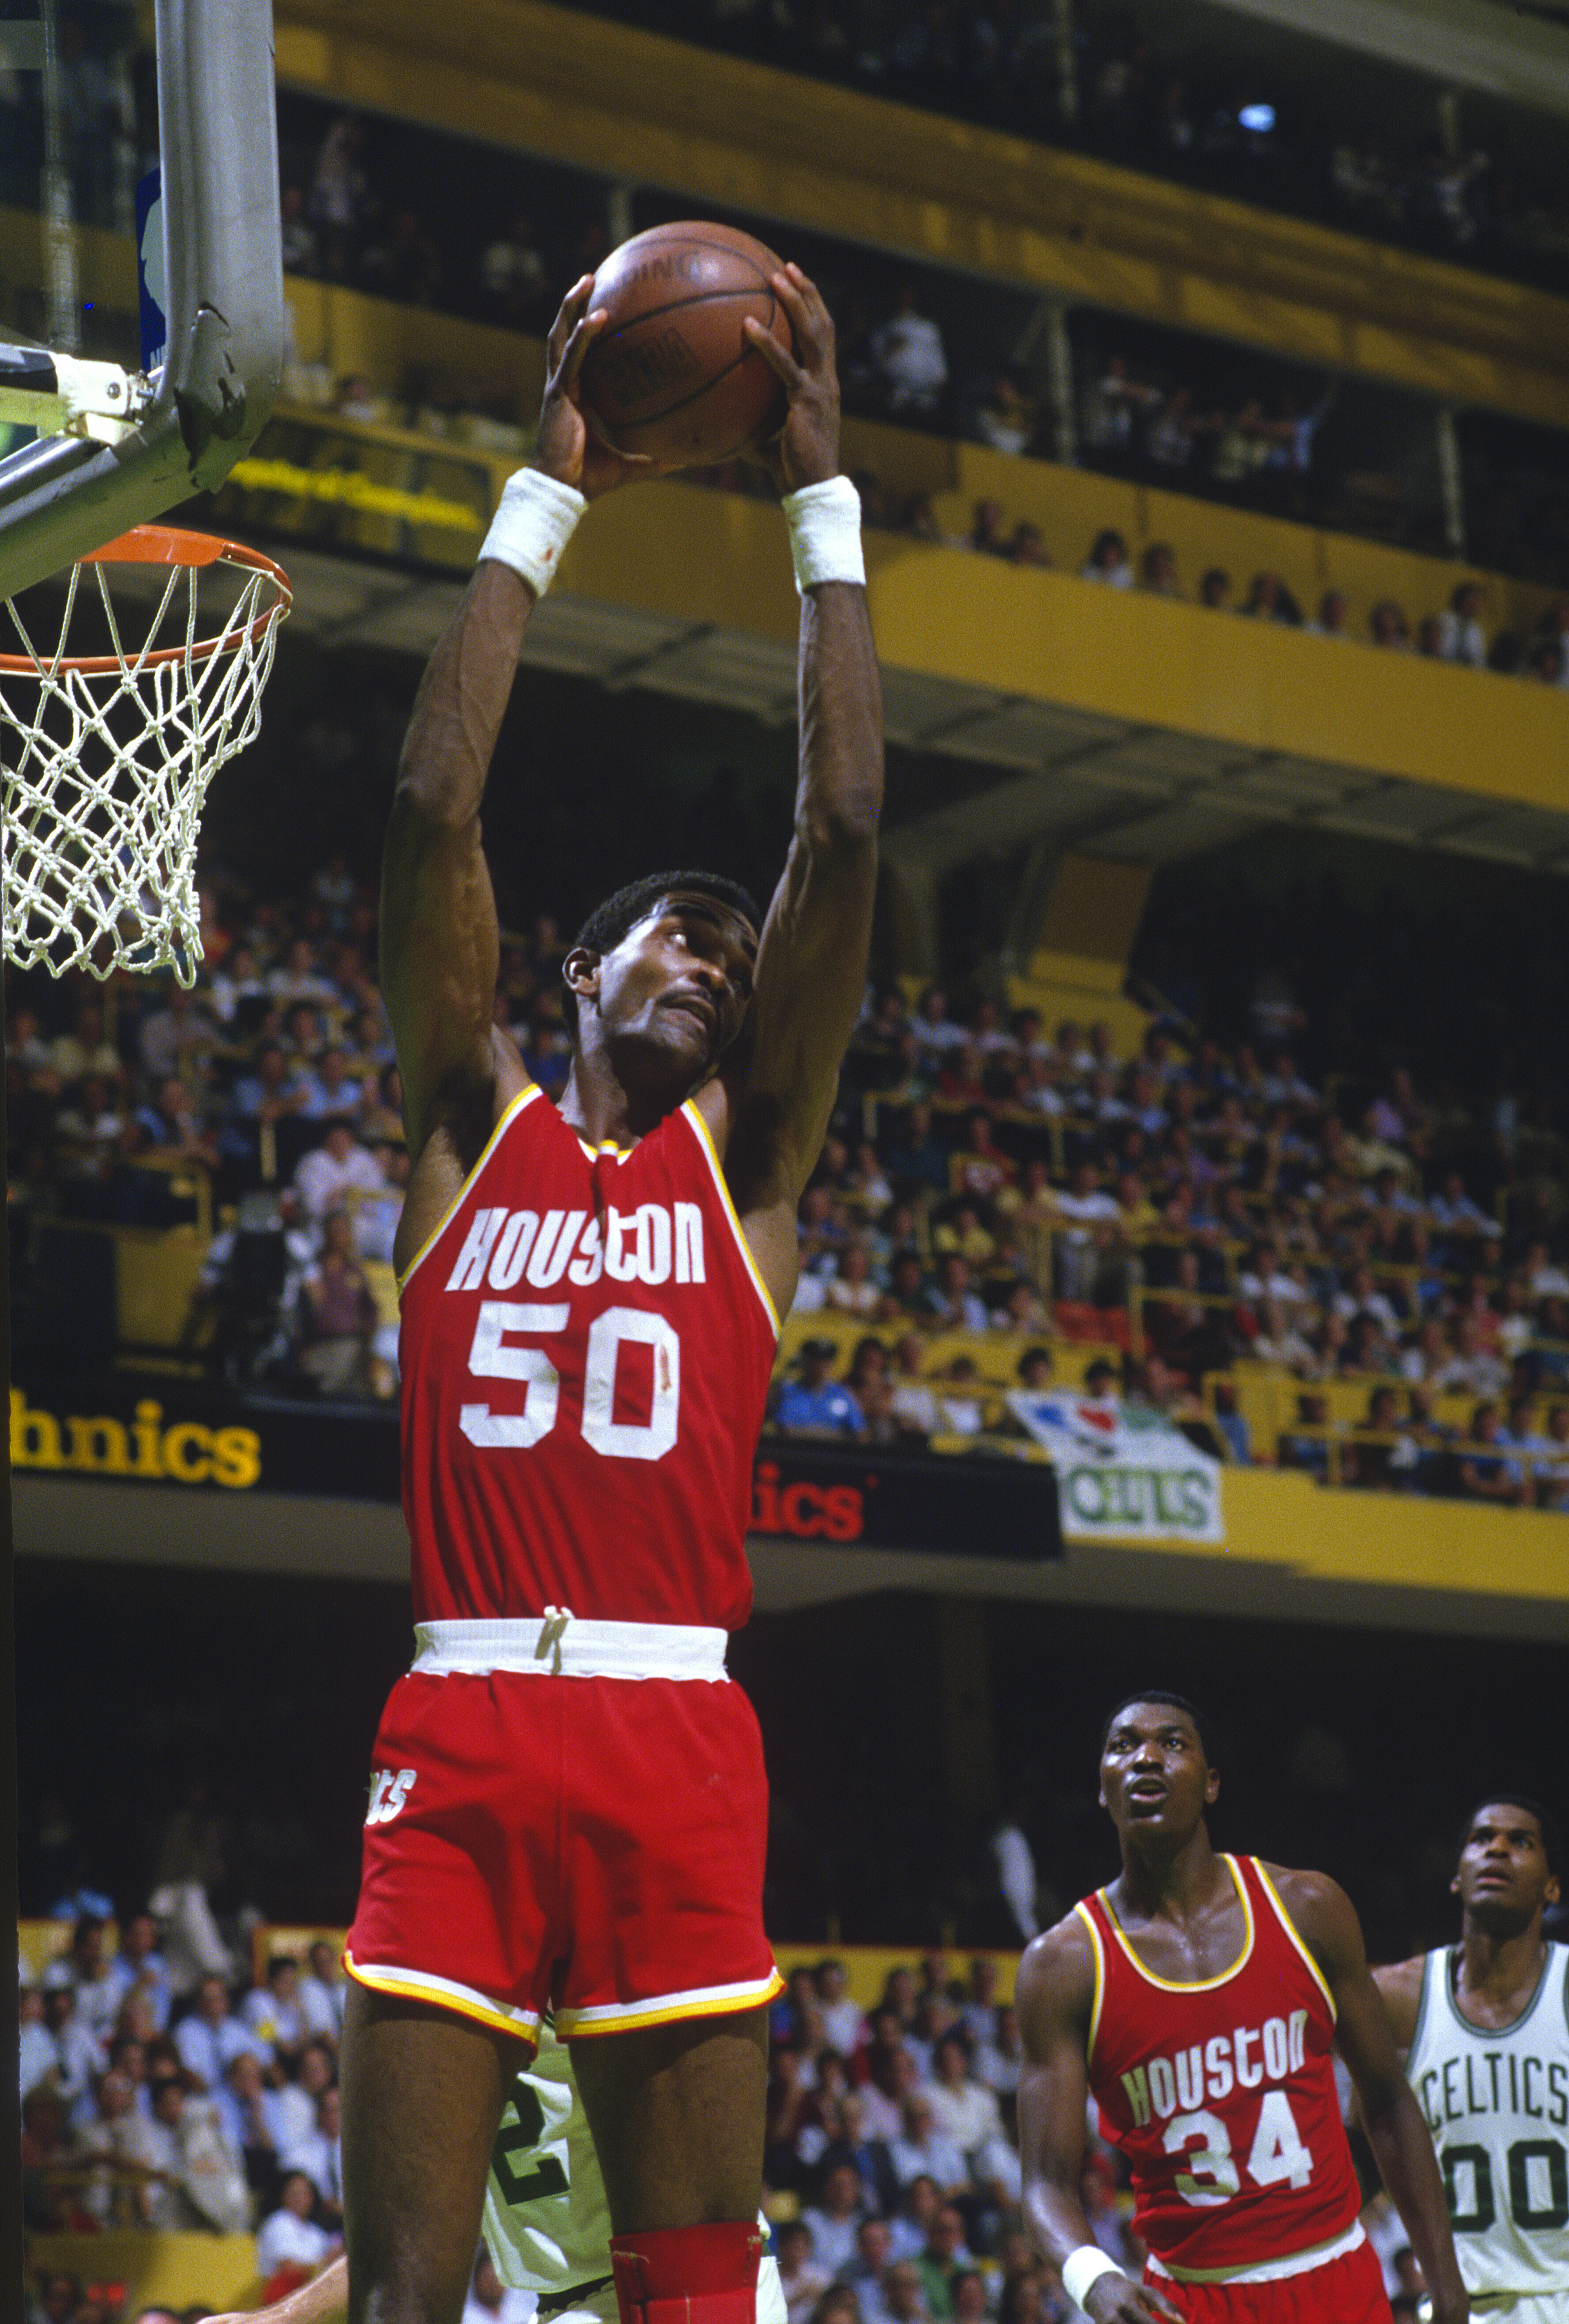 This is a photo of Ralph Sampson in his 1984 season with the Rockets.